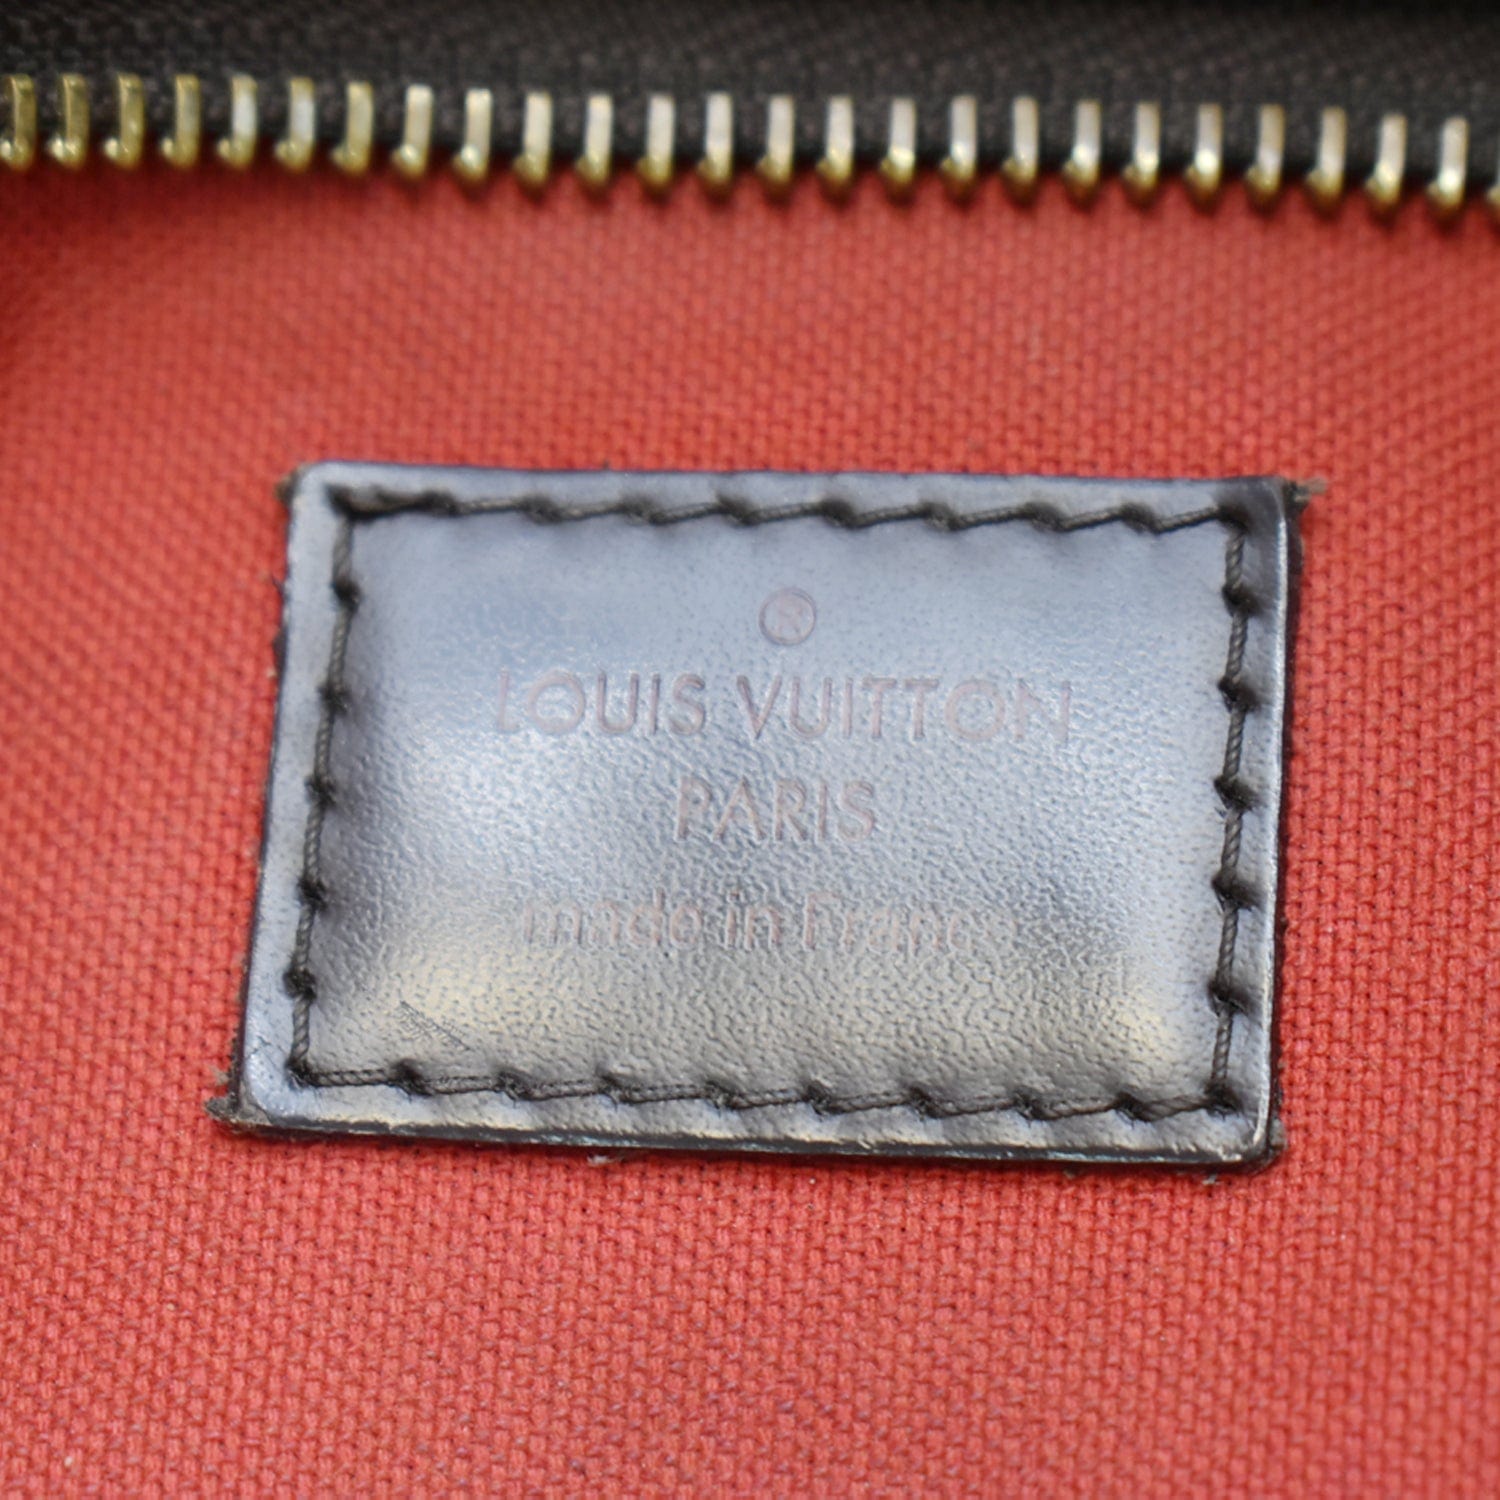 BRAND:LOUIS VUITTON CONDITIONS:GOOD ✓ CODE:✓ COLOR: BROWN  CONTACT:+255757788686